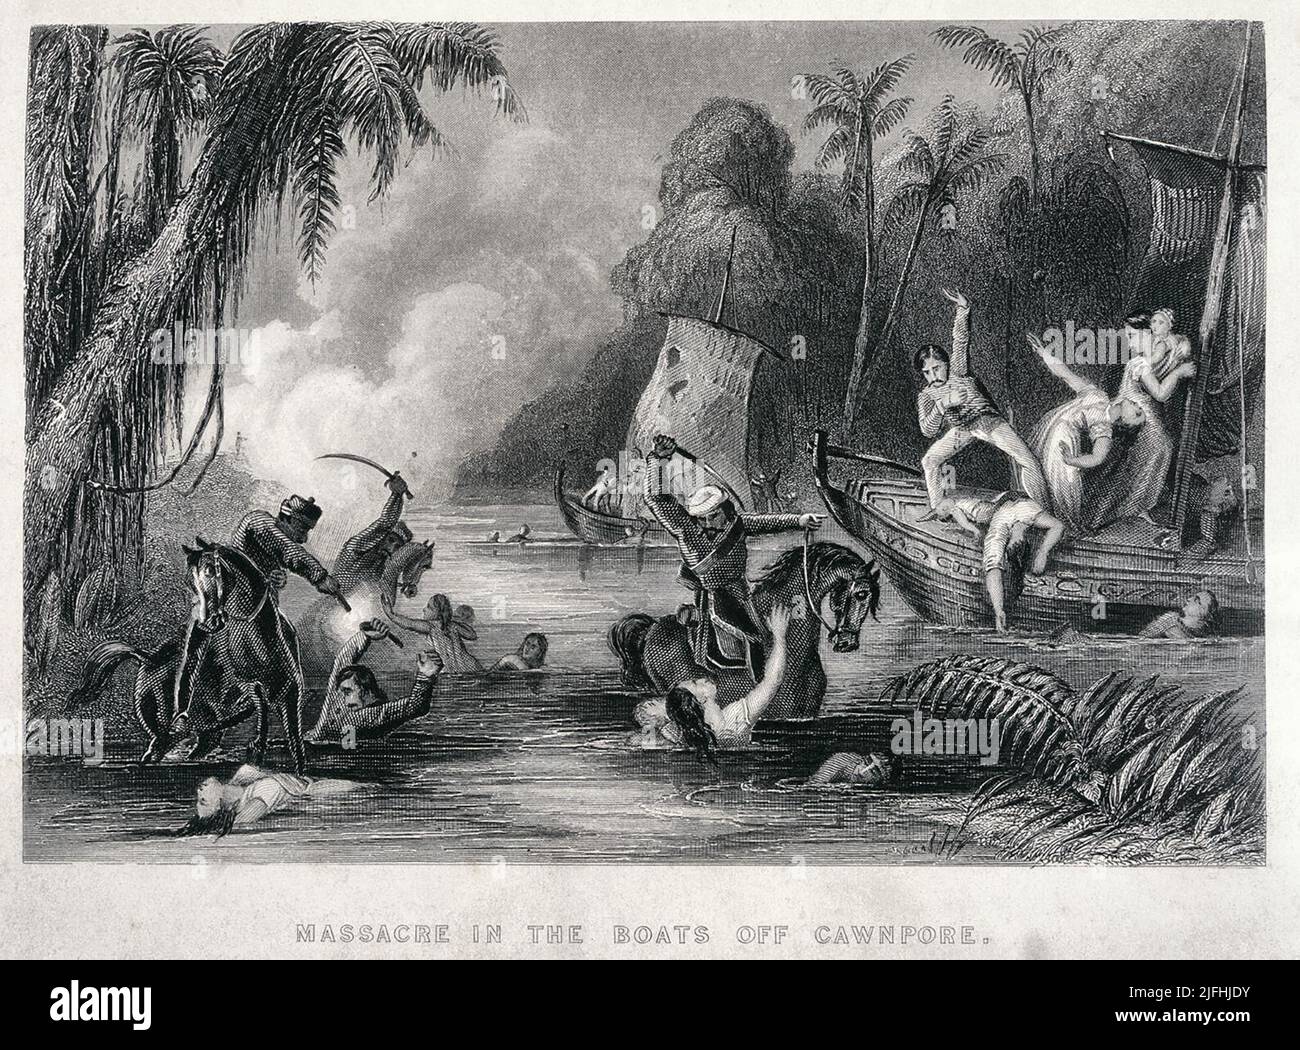 Massacre in the Boats off Cawnpore - A contemporary engraving of the massacre at the Satichaura Ghat on 27 June 1857 following the Siege of Cawnpore during the 1857 Indian rebellion. Stock Photo